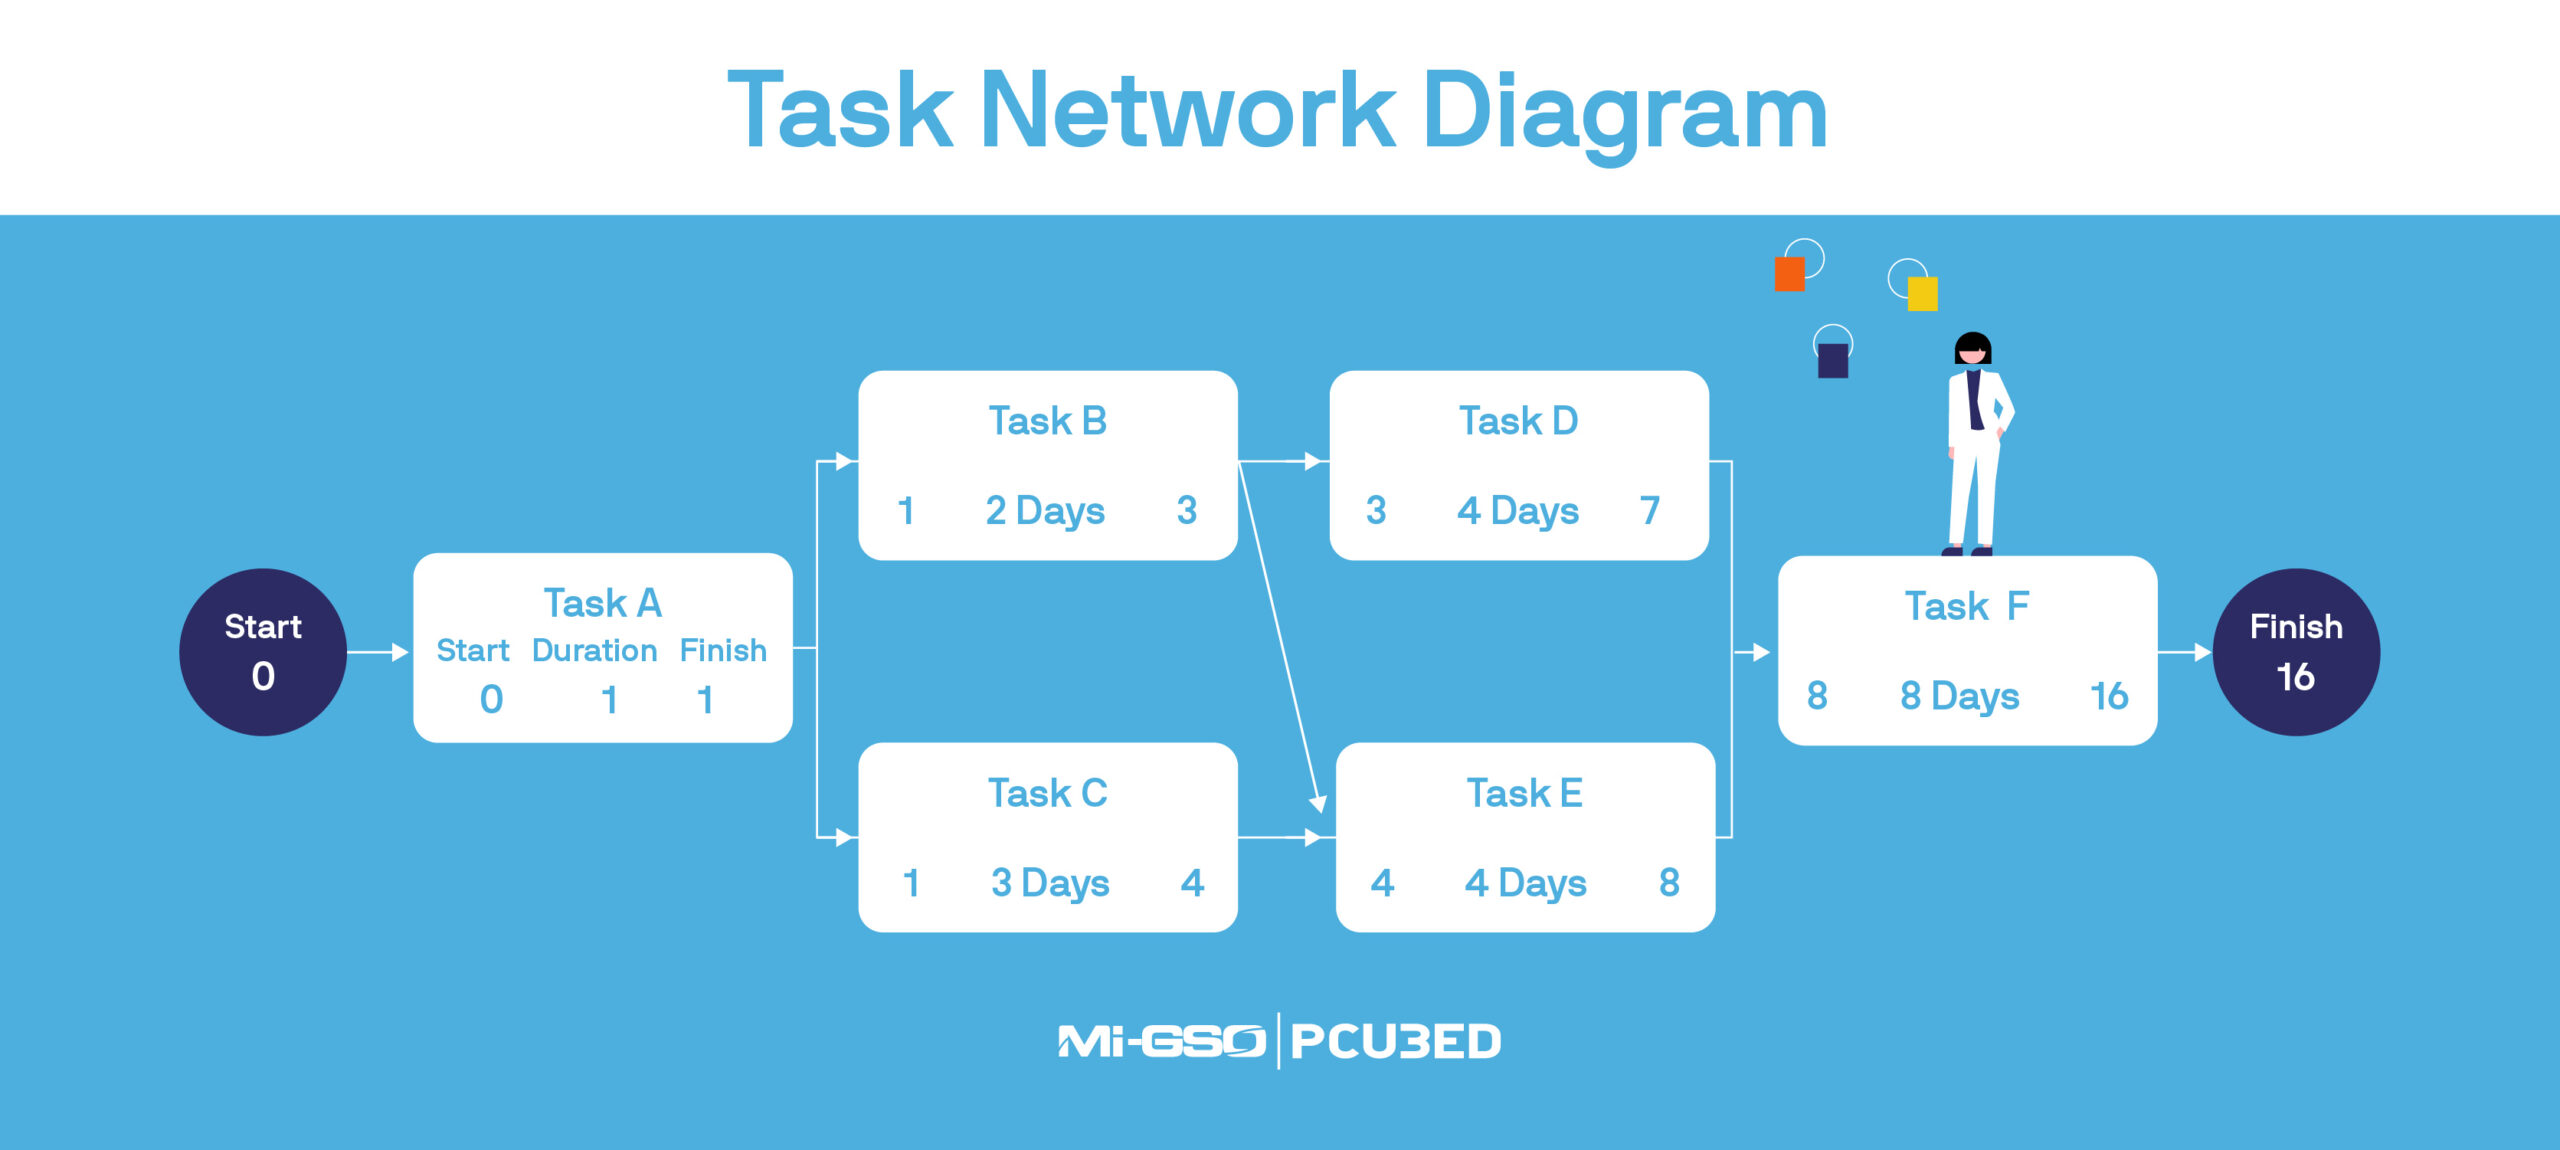 Task Network Diagram to plan and visualize project tasks